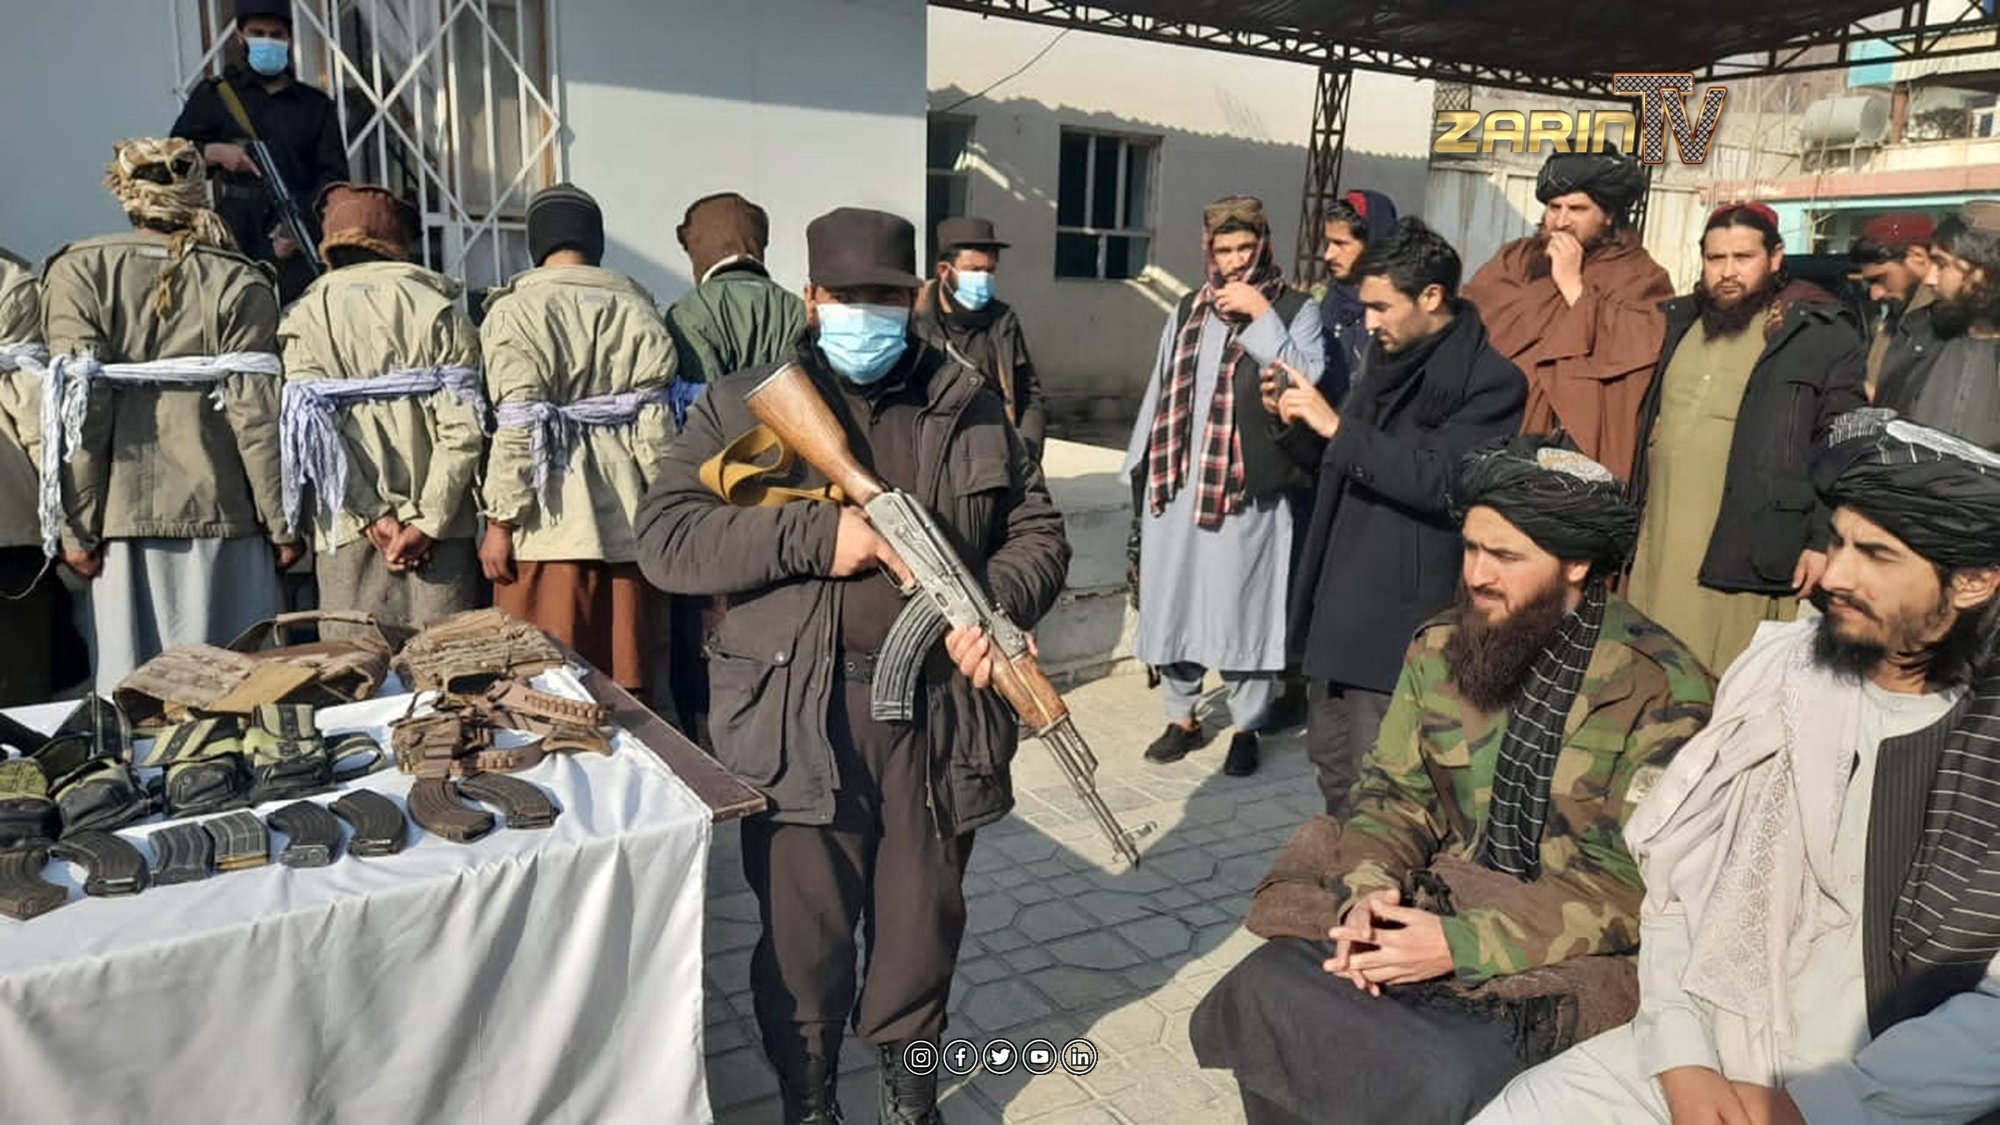 Numerous arrests and ransom demands by local Taliban commanders